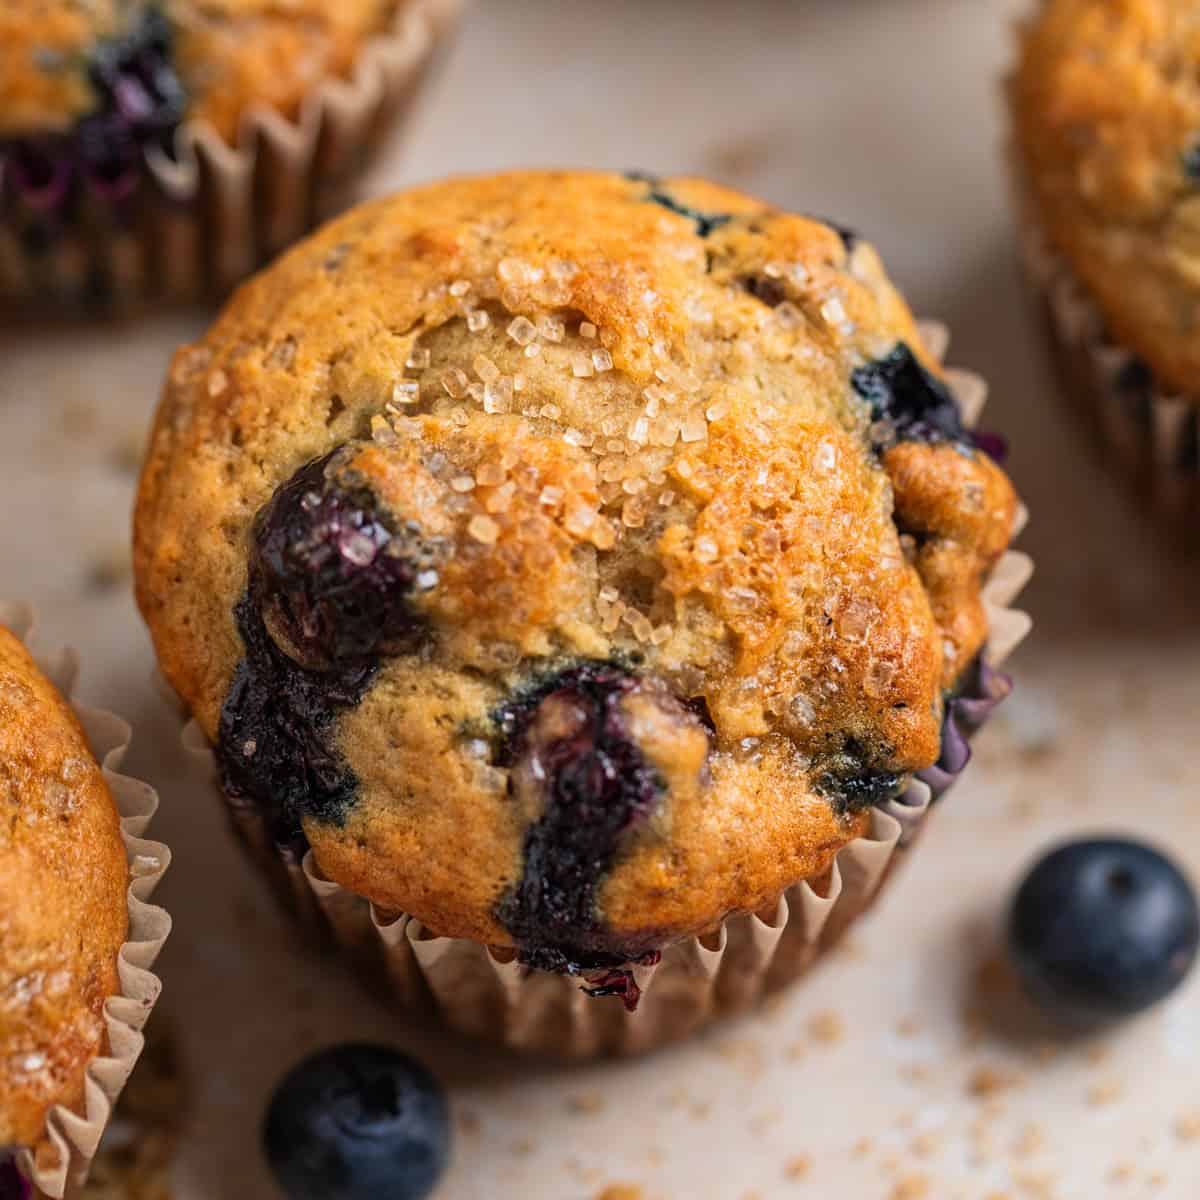 Blueberry muffin with coarse sugar on top and crumbs and berries surrounding.